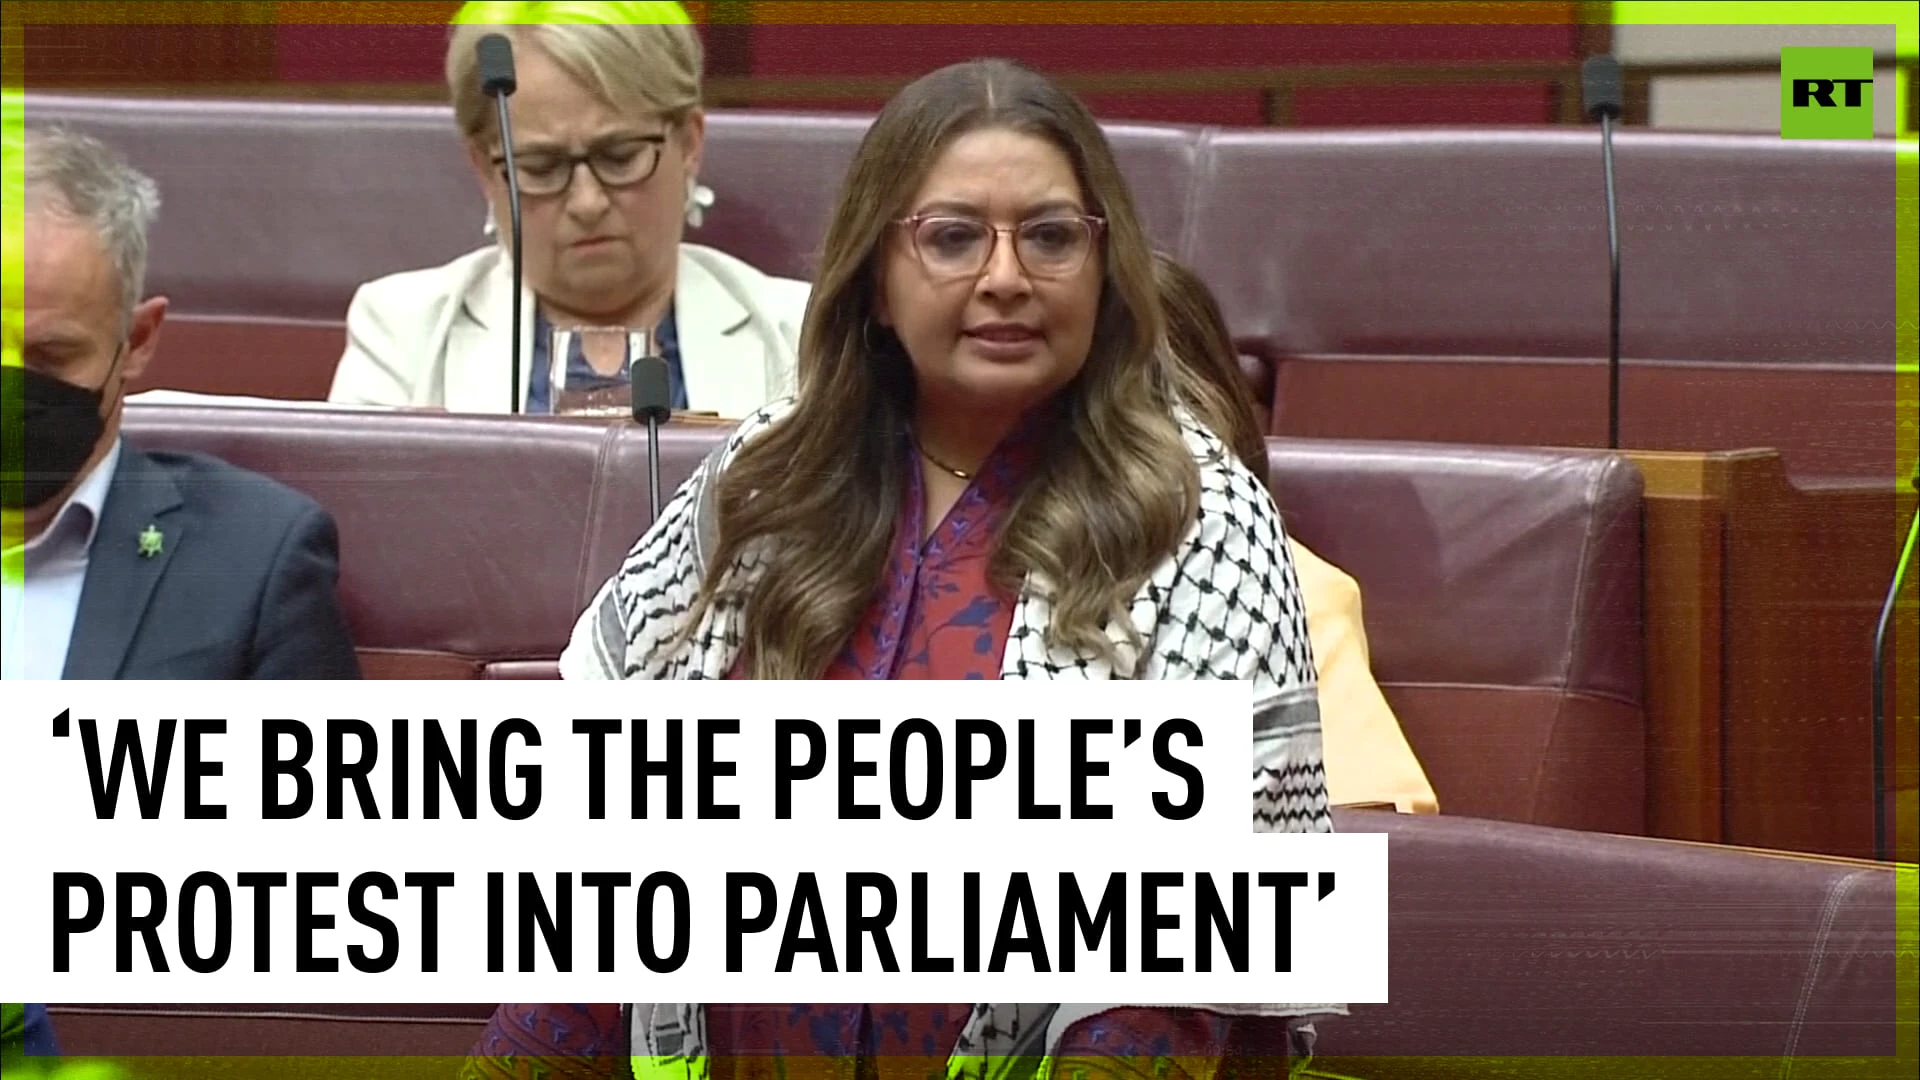 Greens walk out of Senate in protest over Aussi govt’s response to Israel-Gaza conflict